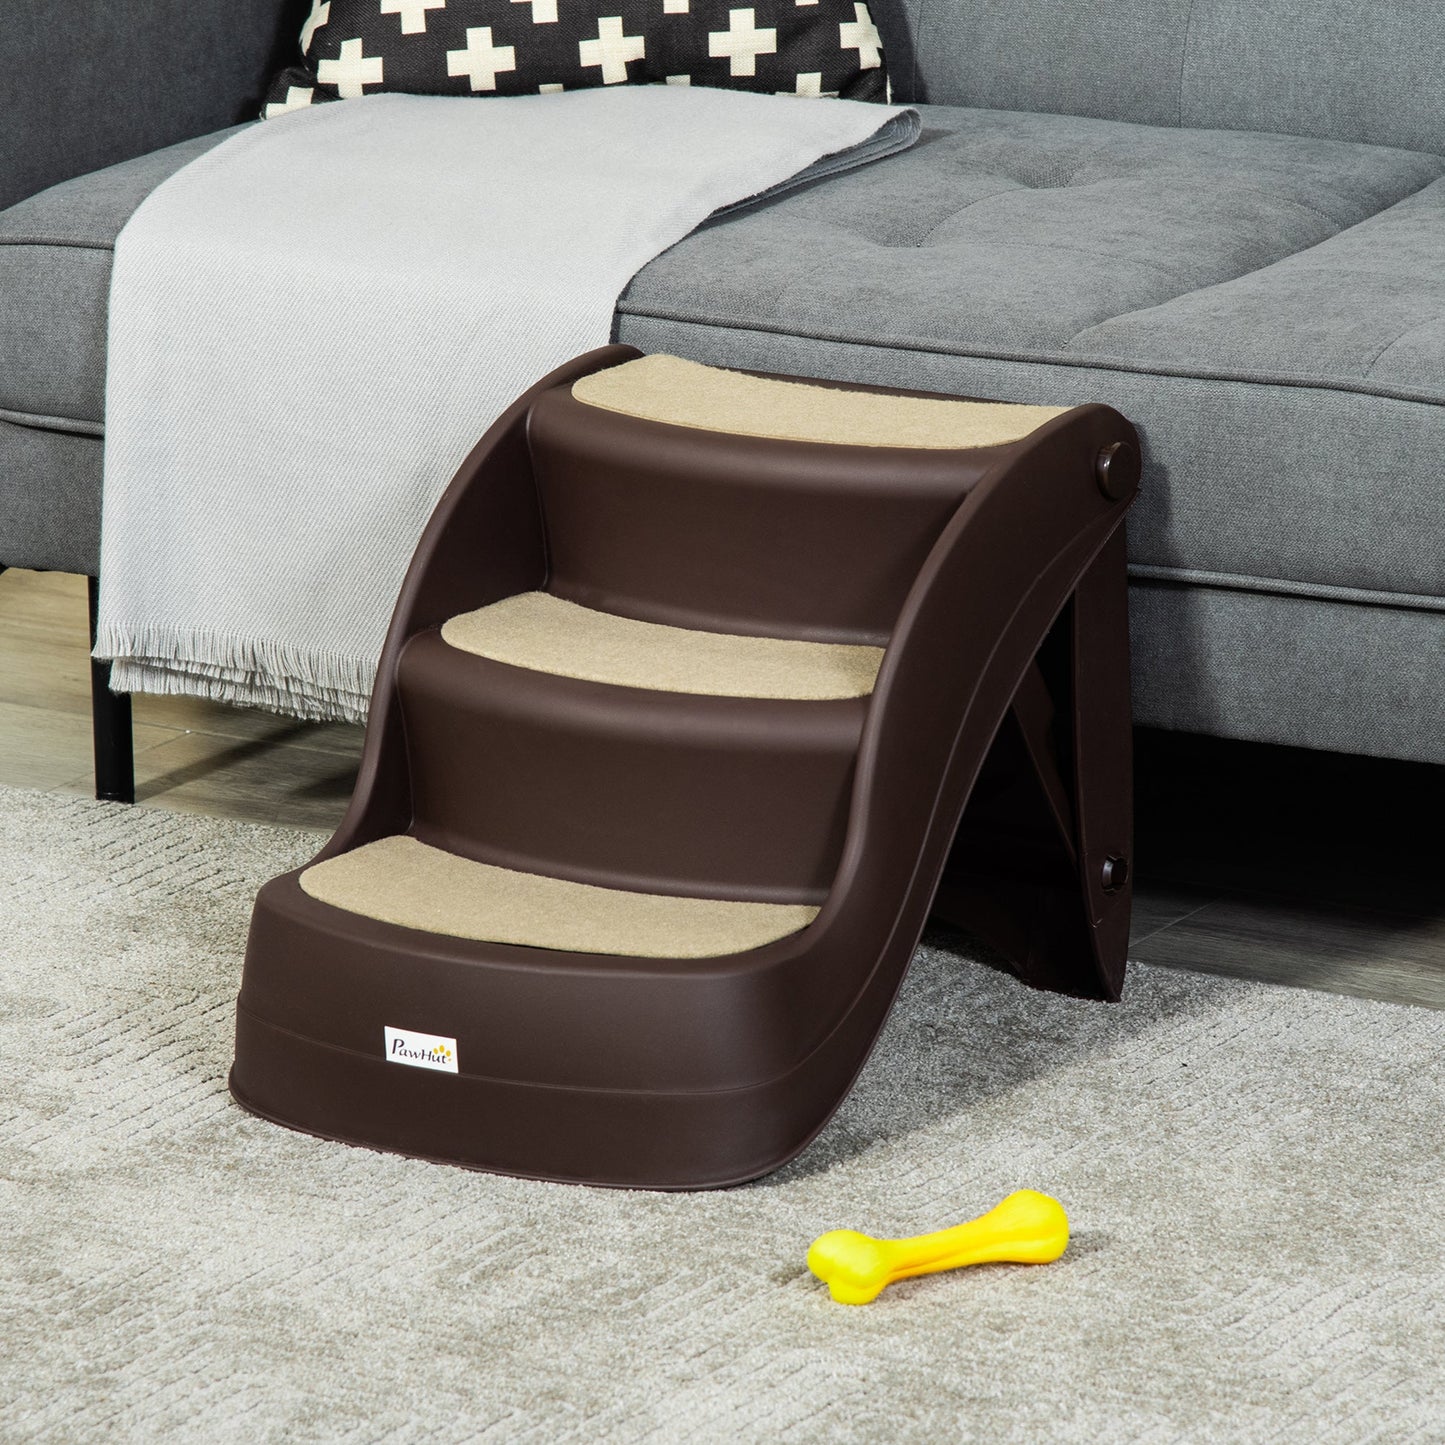 Portable Pet Stairs Foldable Steps for Small Dogs and Cats 3-Step with Non-slip Treads for Beds Sofas, Brown at Gallery Canada